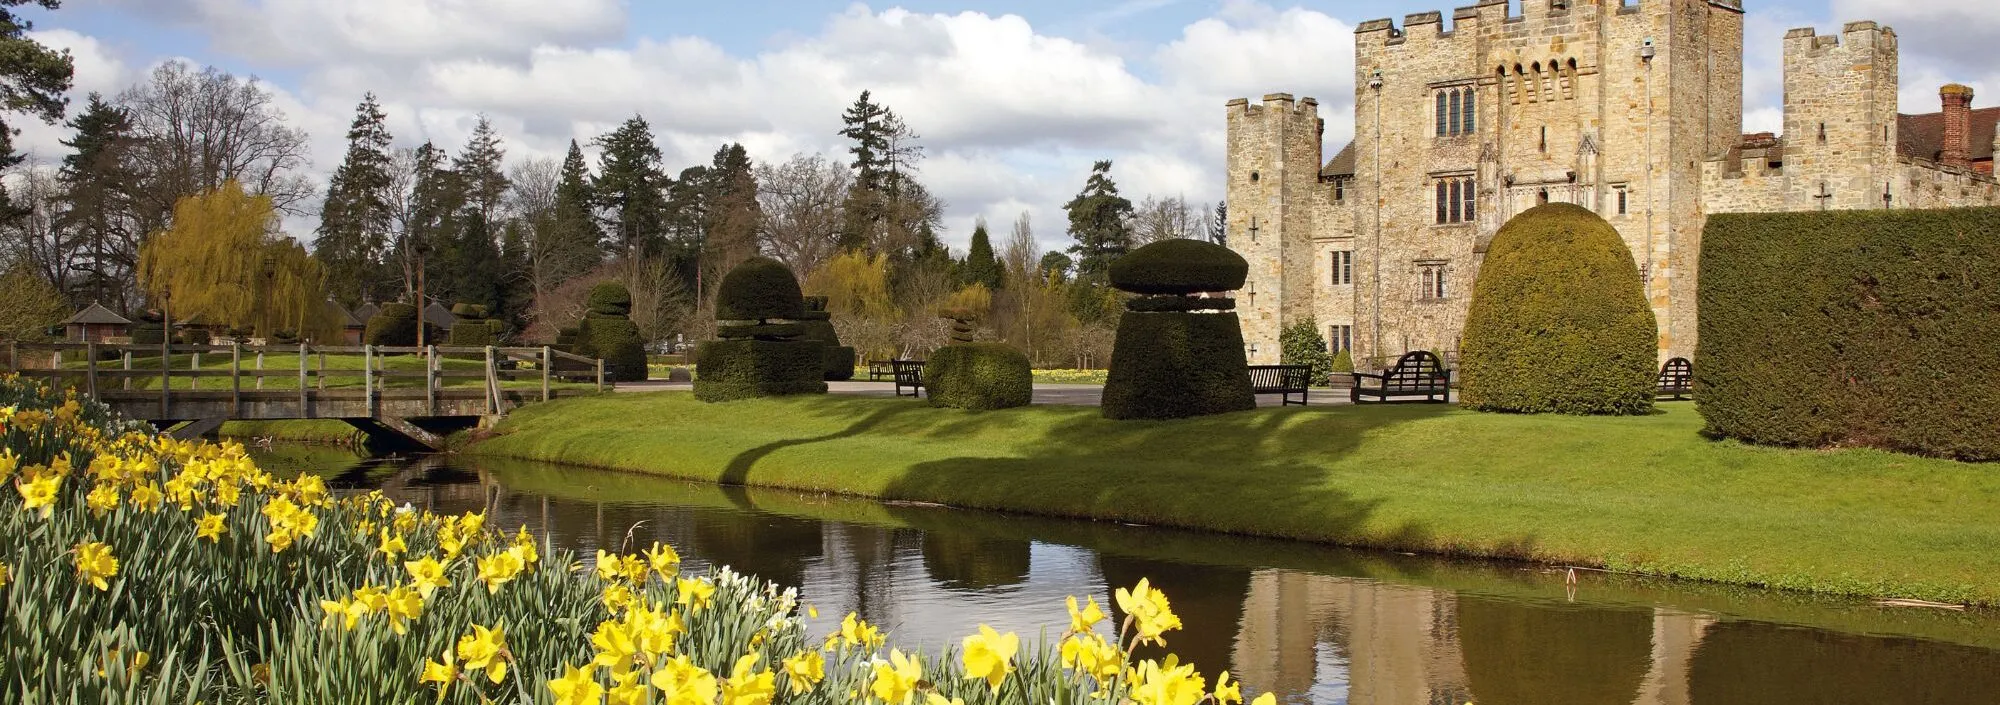 Celebrate the Coronation weekend at Leeds Castle Grounds and Gardens.